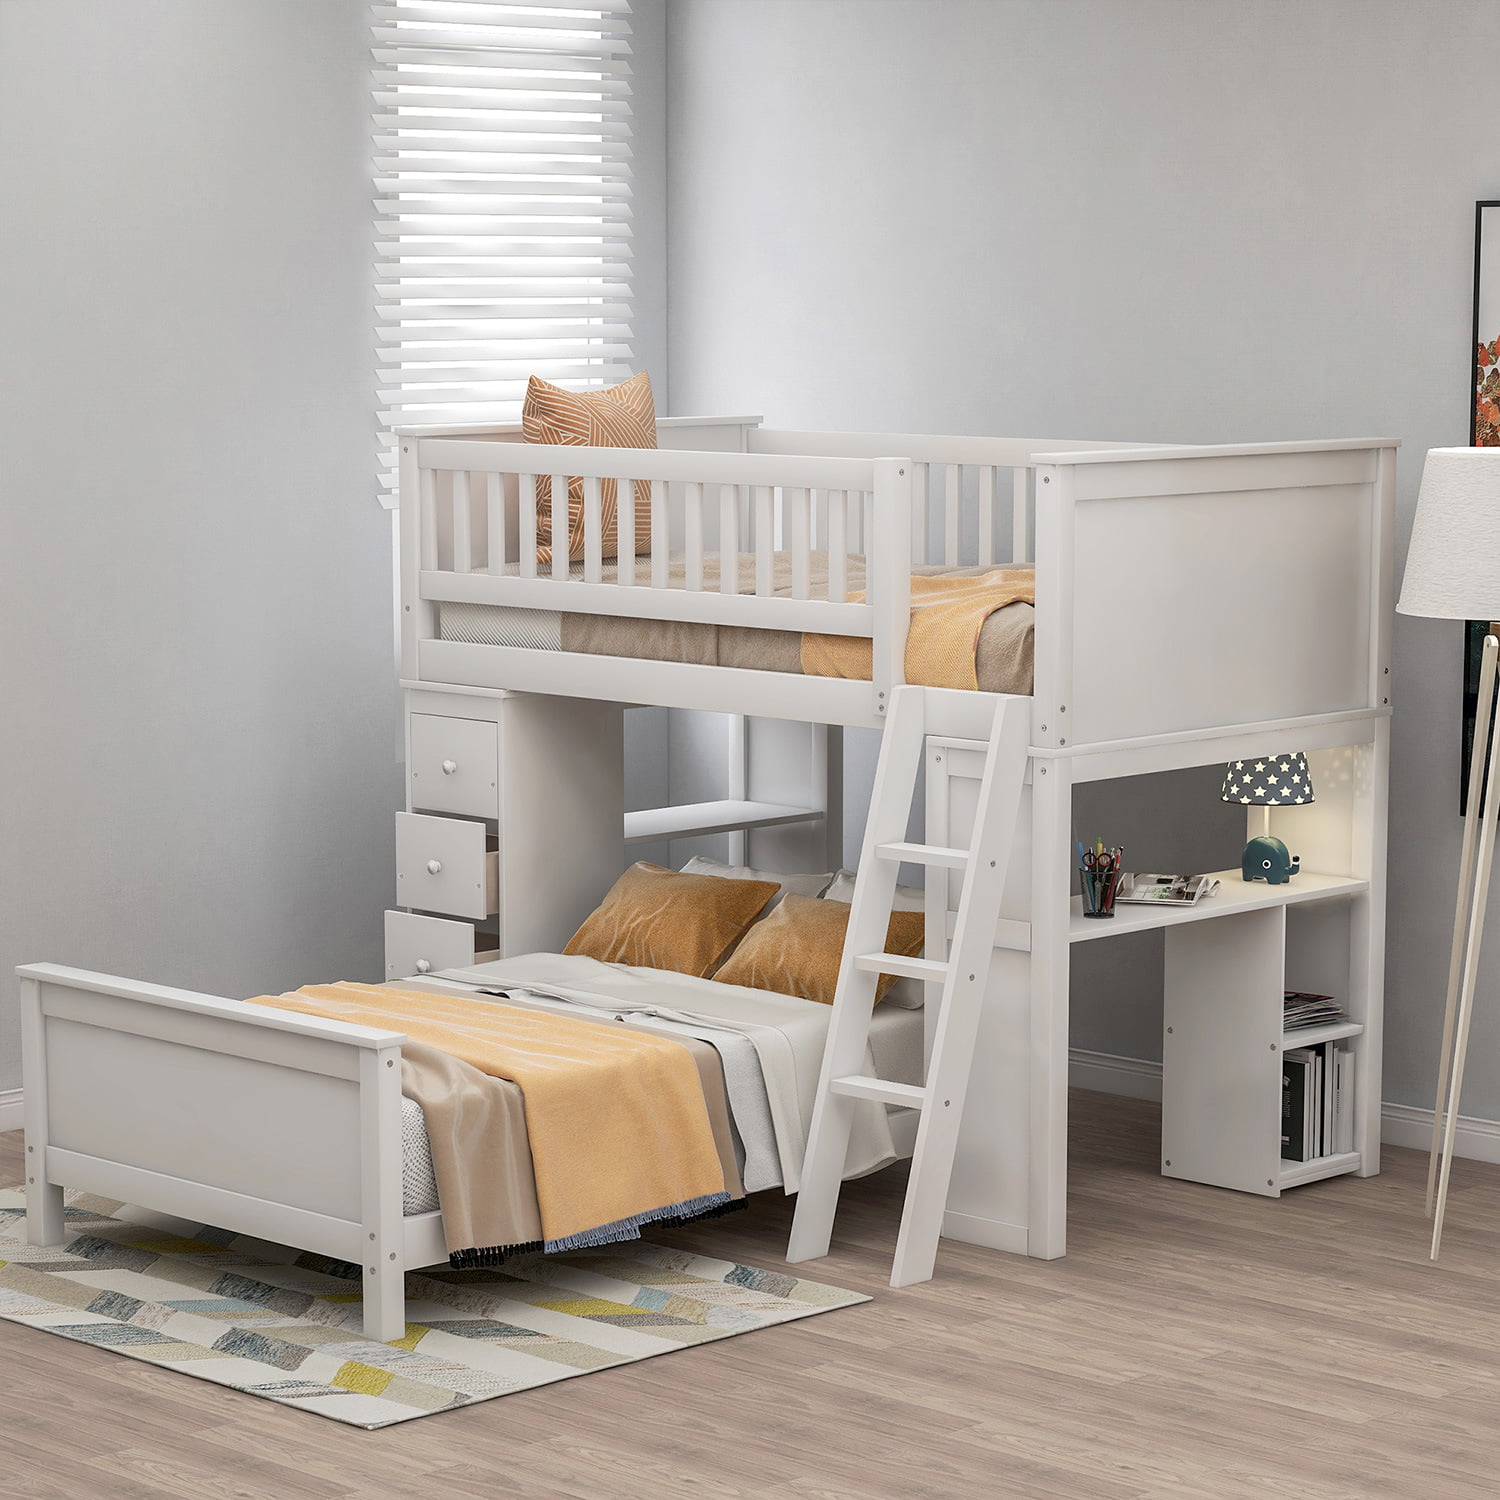 Bunk Bed Twin Over With Desk Boys, Twin Over Desk Bunk Bed